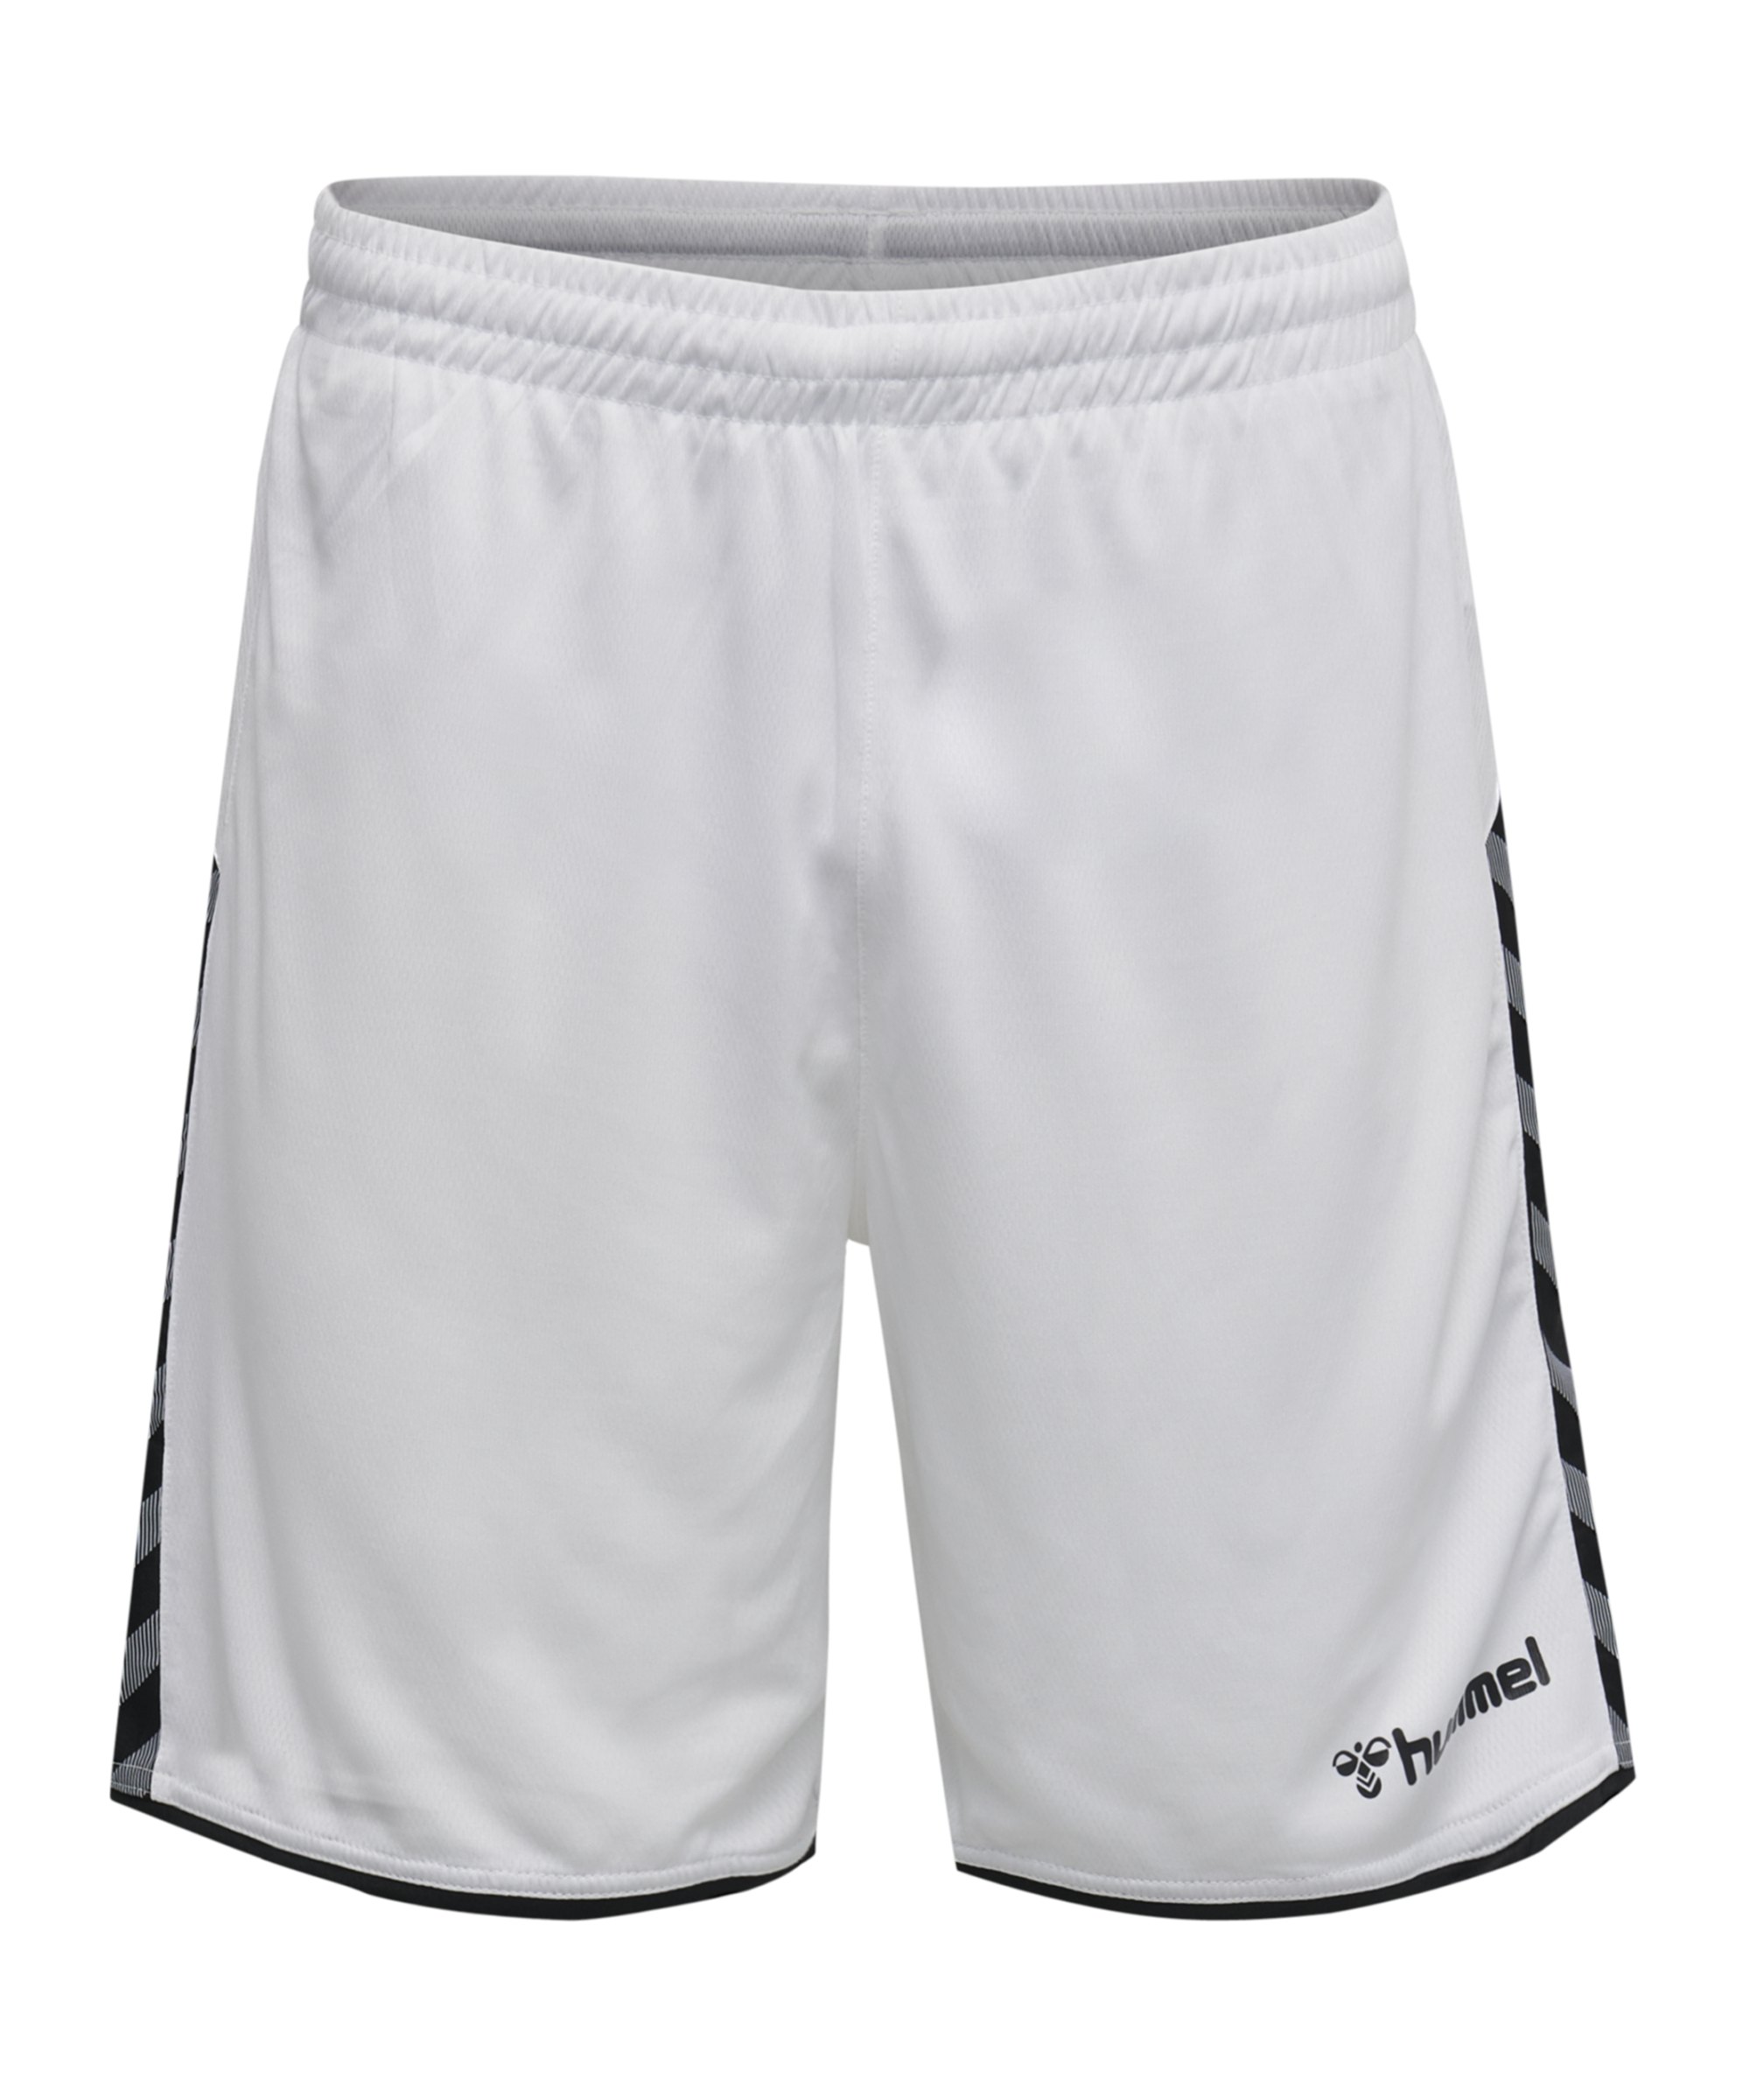 Hummel Authentic Poly Short Weiss F9001 - weiss